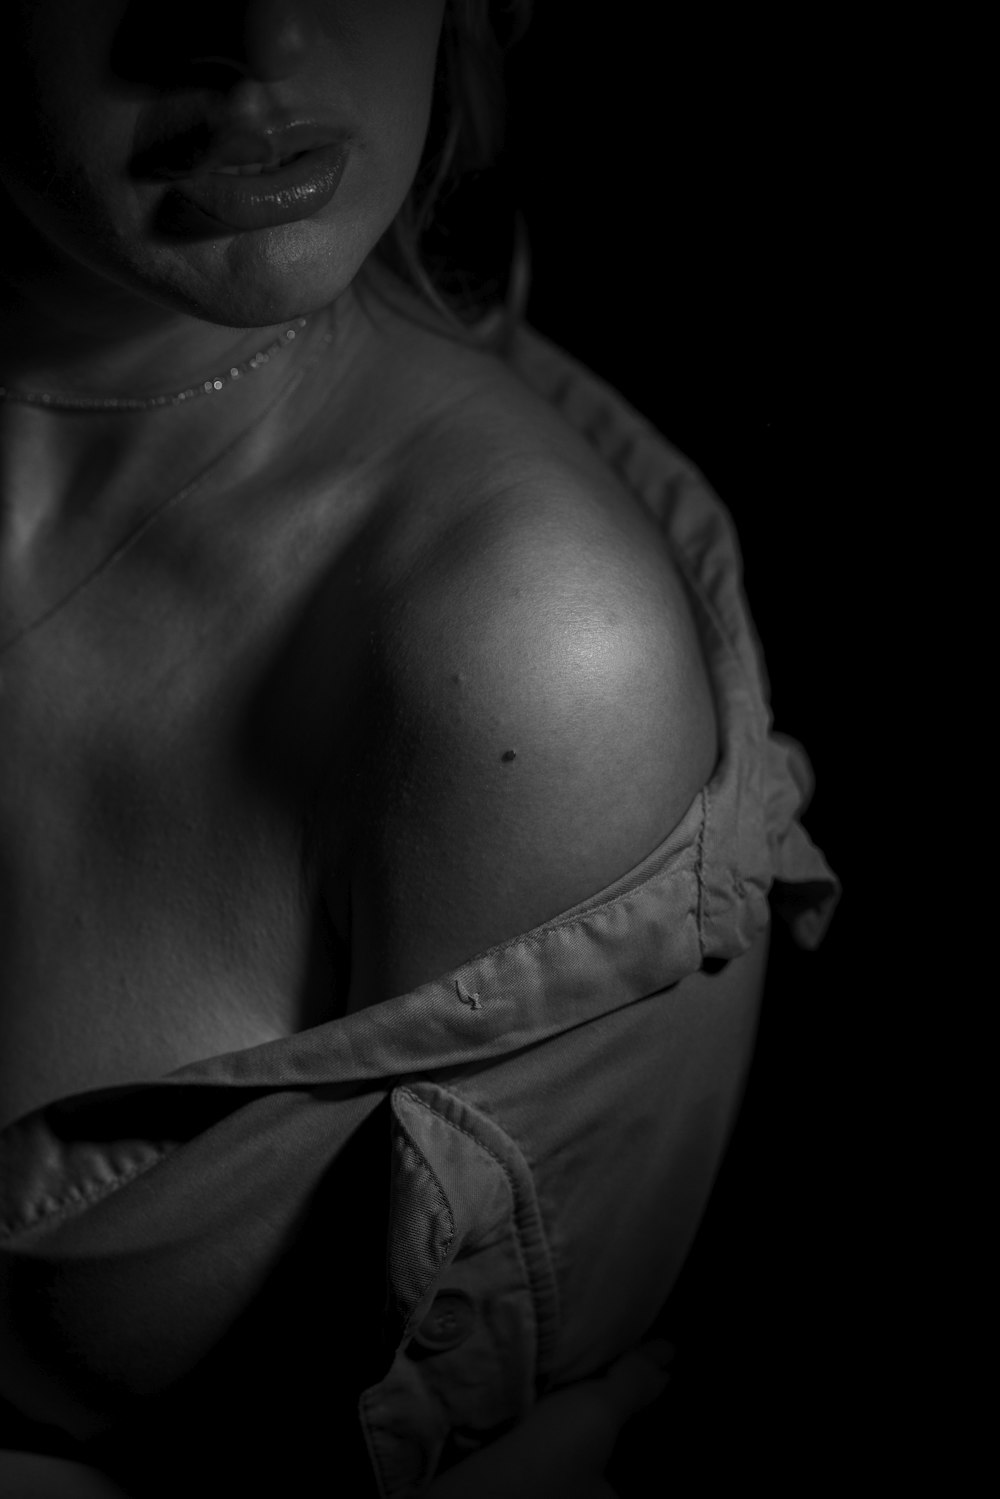 a black and white photo of a woman's breast